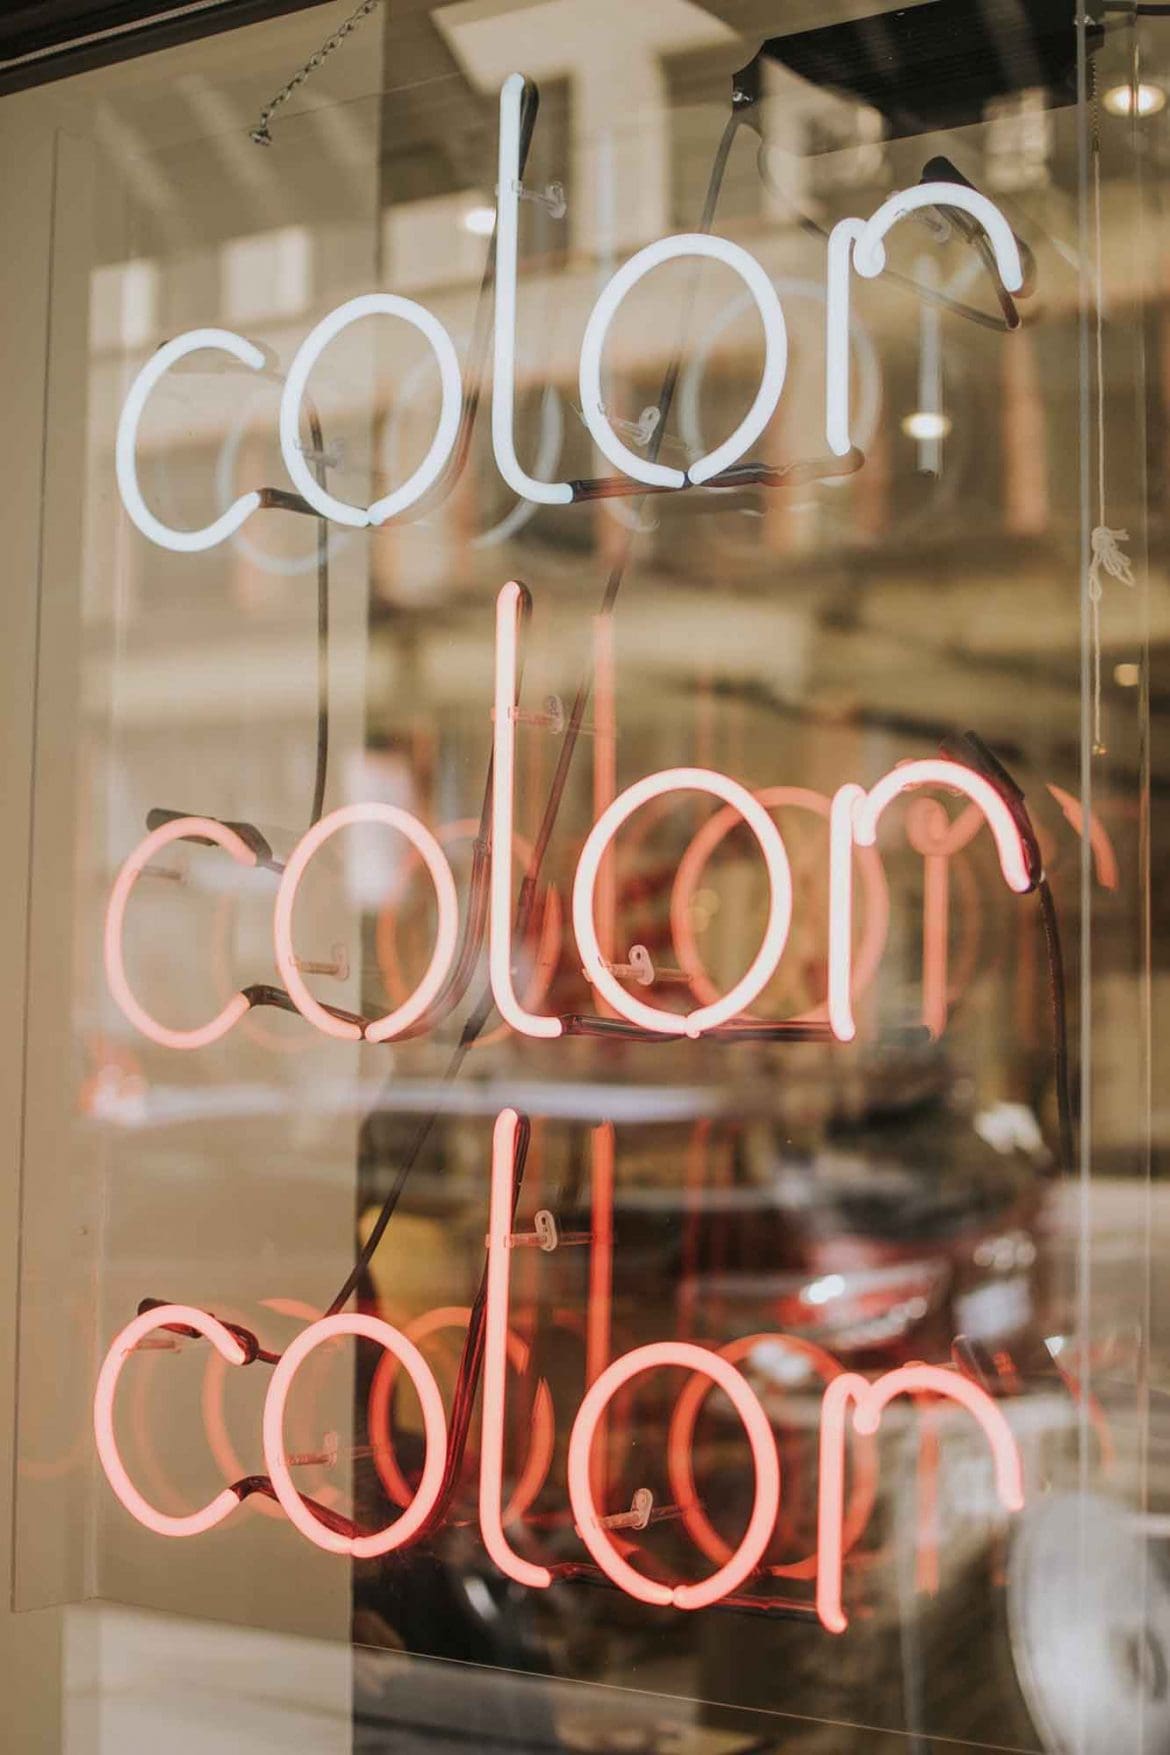 Find the right hair colorist for you